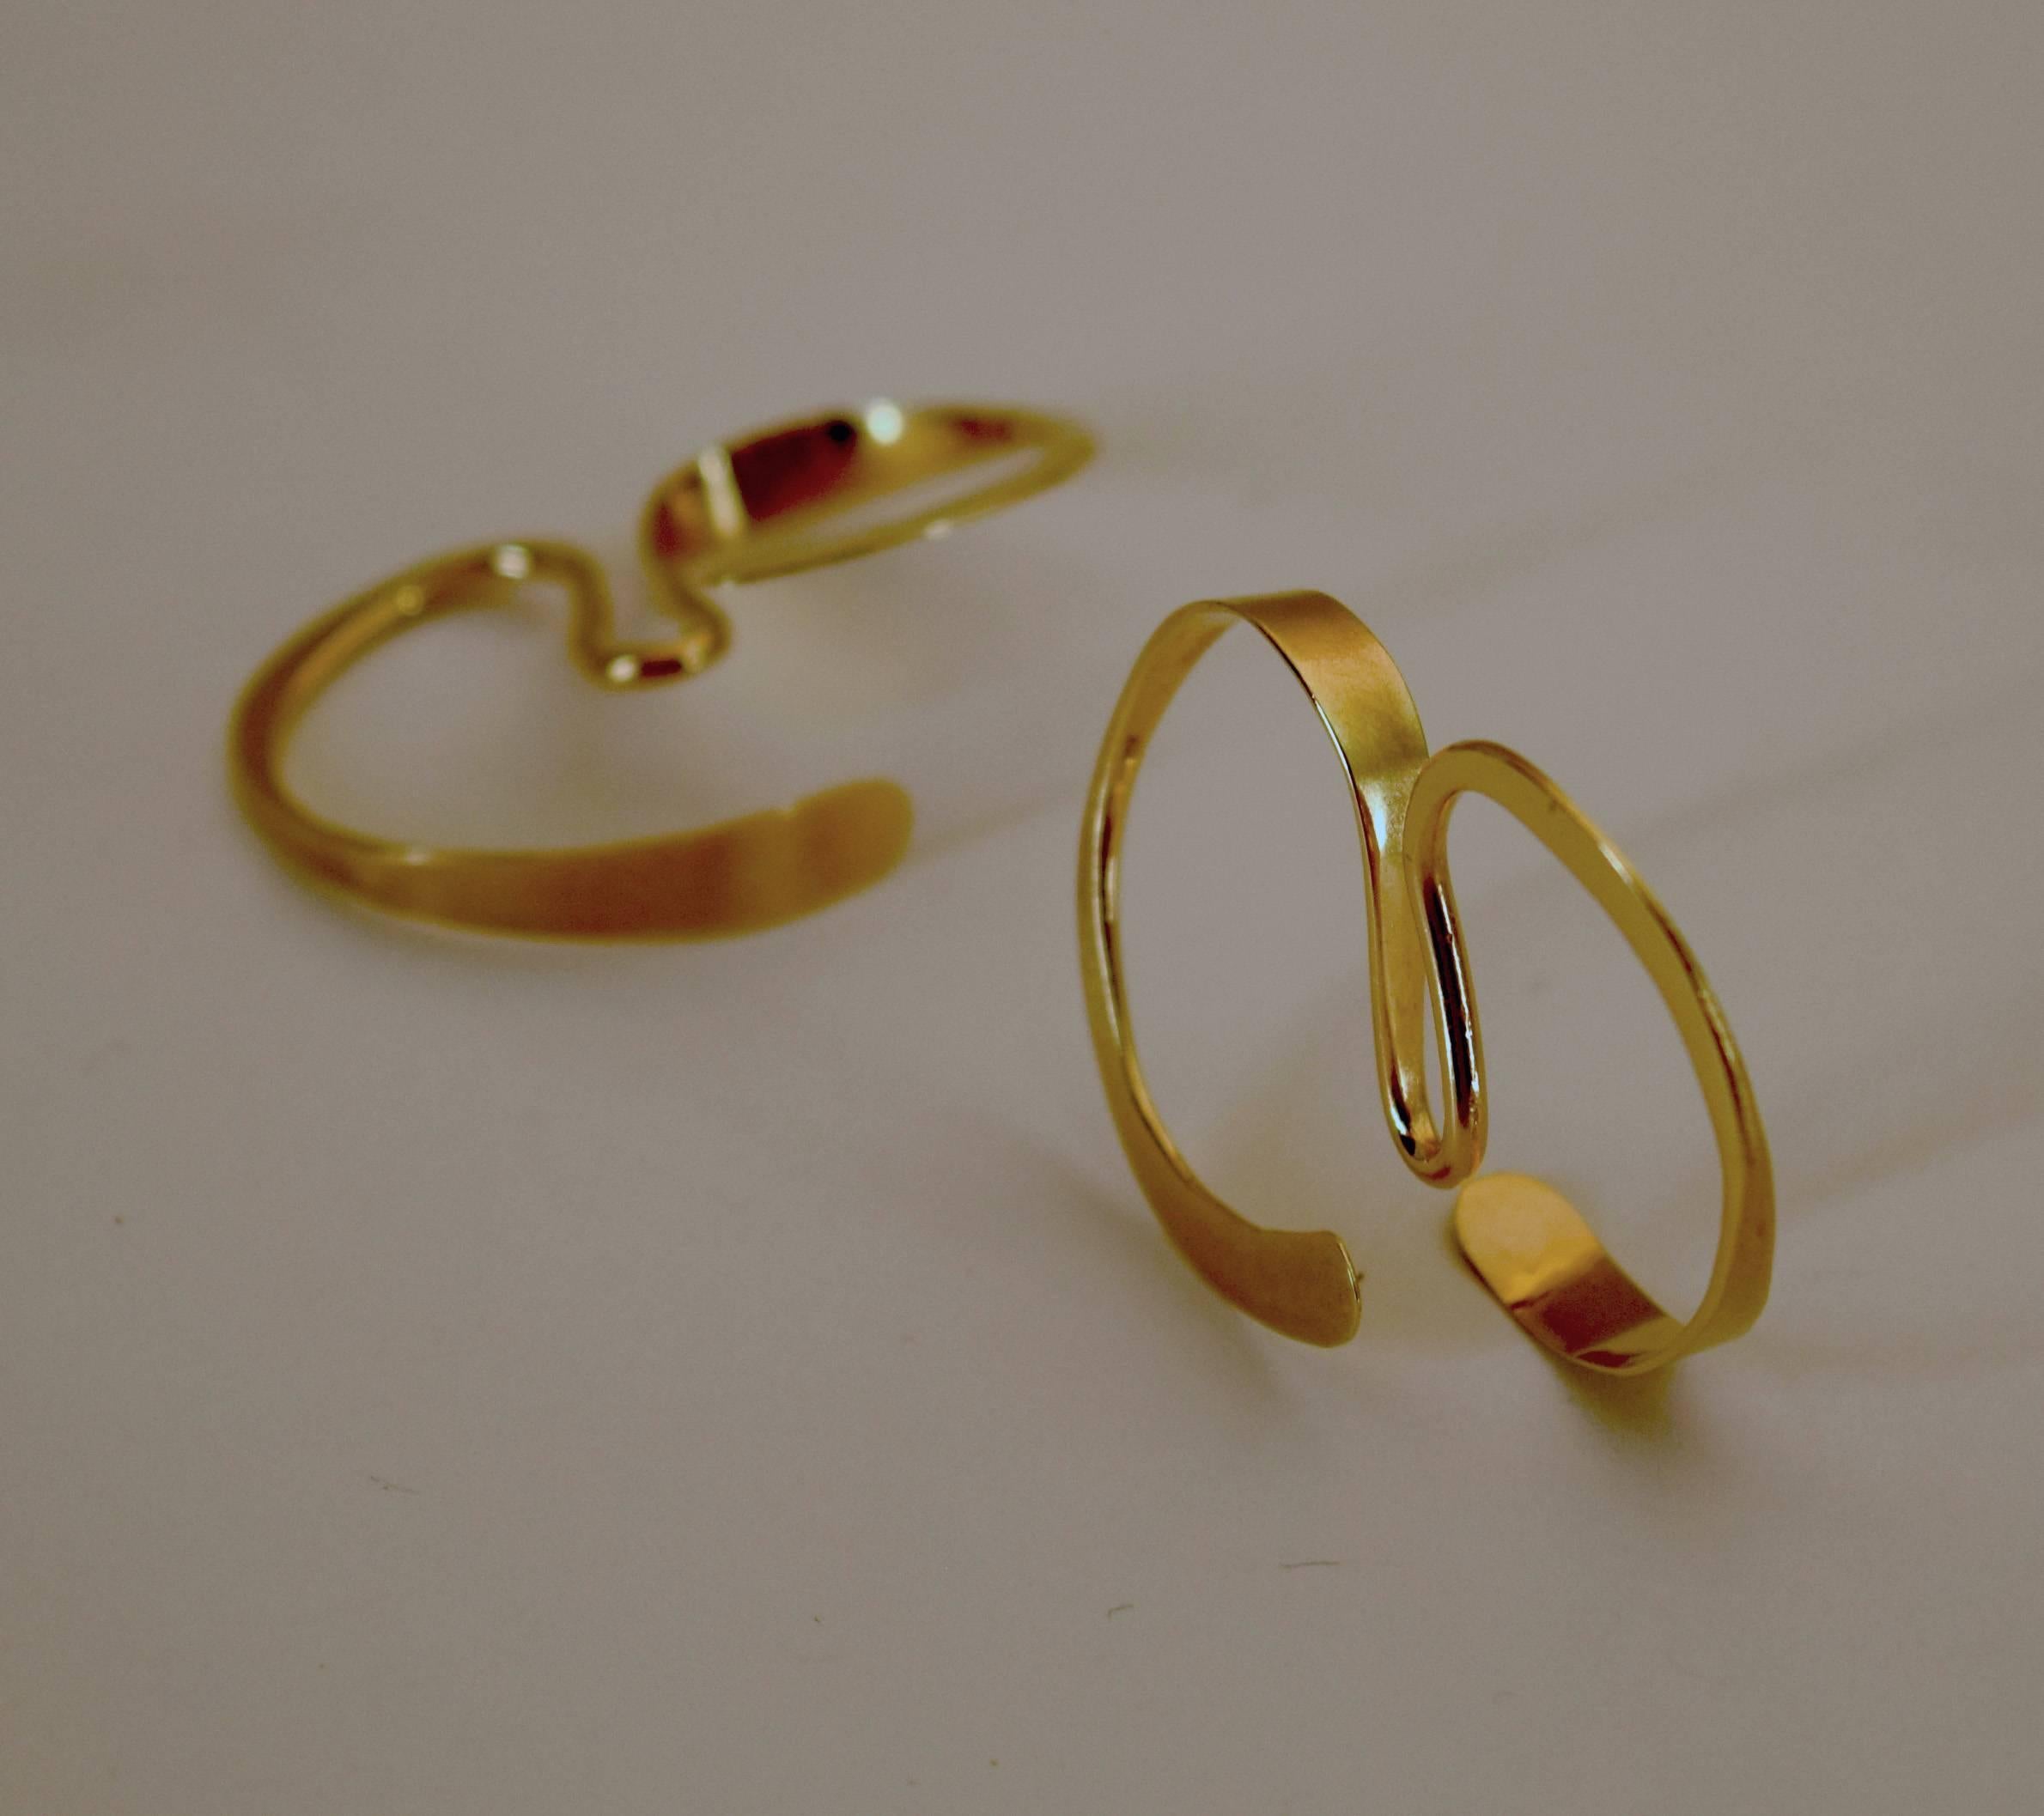 Hand-Crafted Irene Brynner Modernist Non-Pierced Gold Abstract Earrings